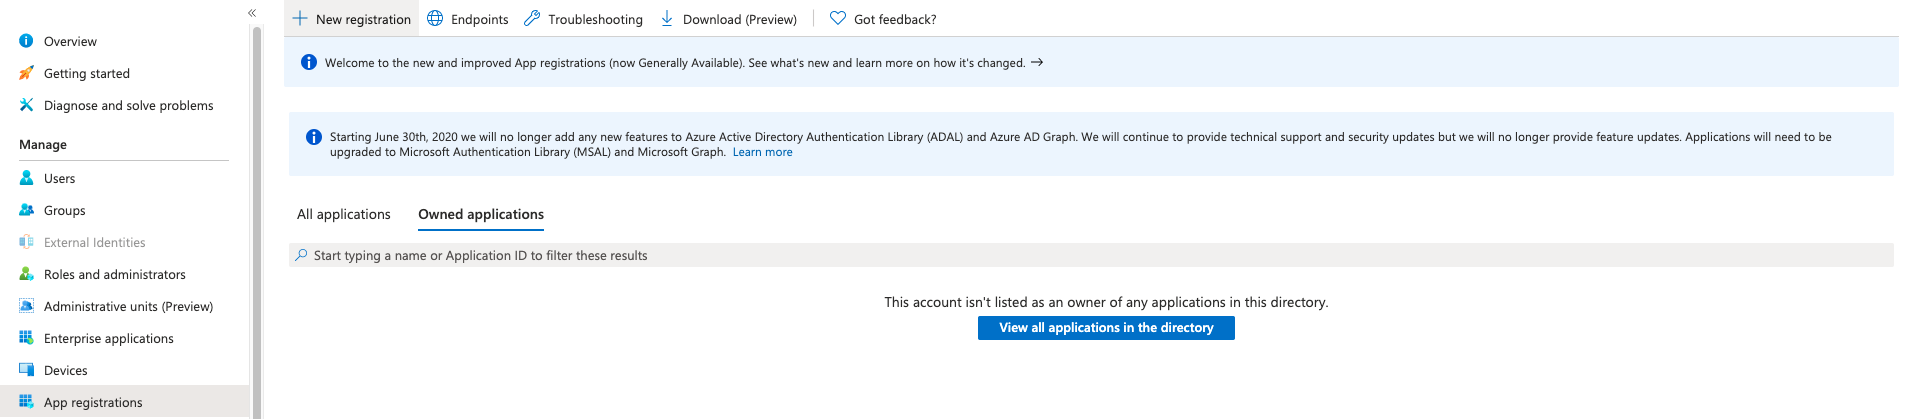 A screenshot of the Azure Owned Applications tab on the New Registration page